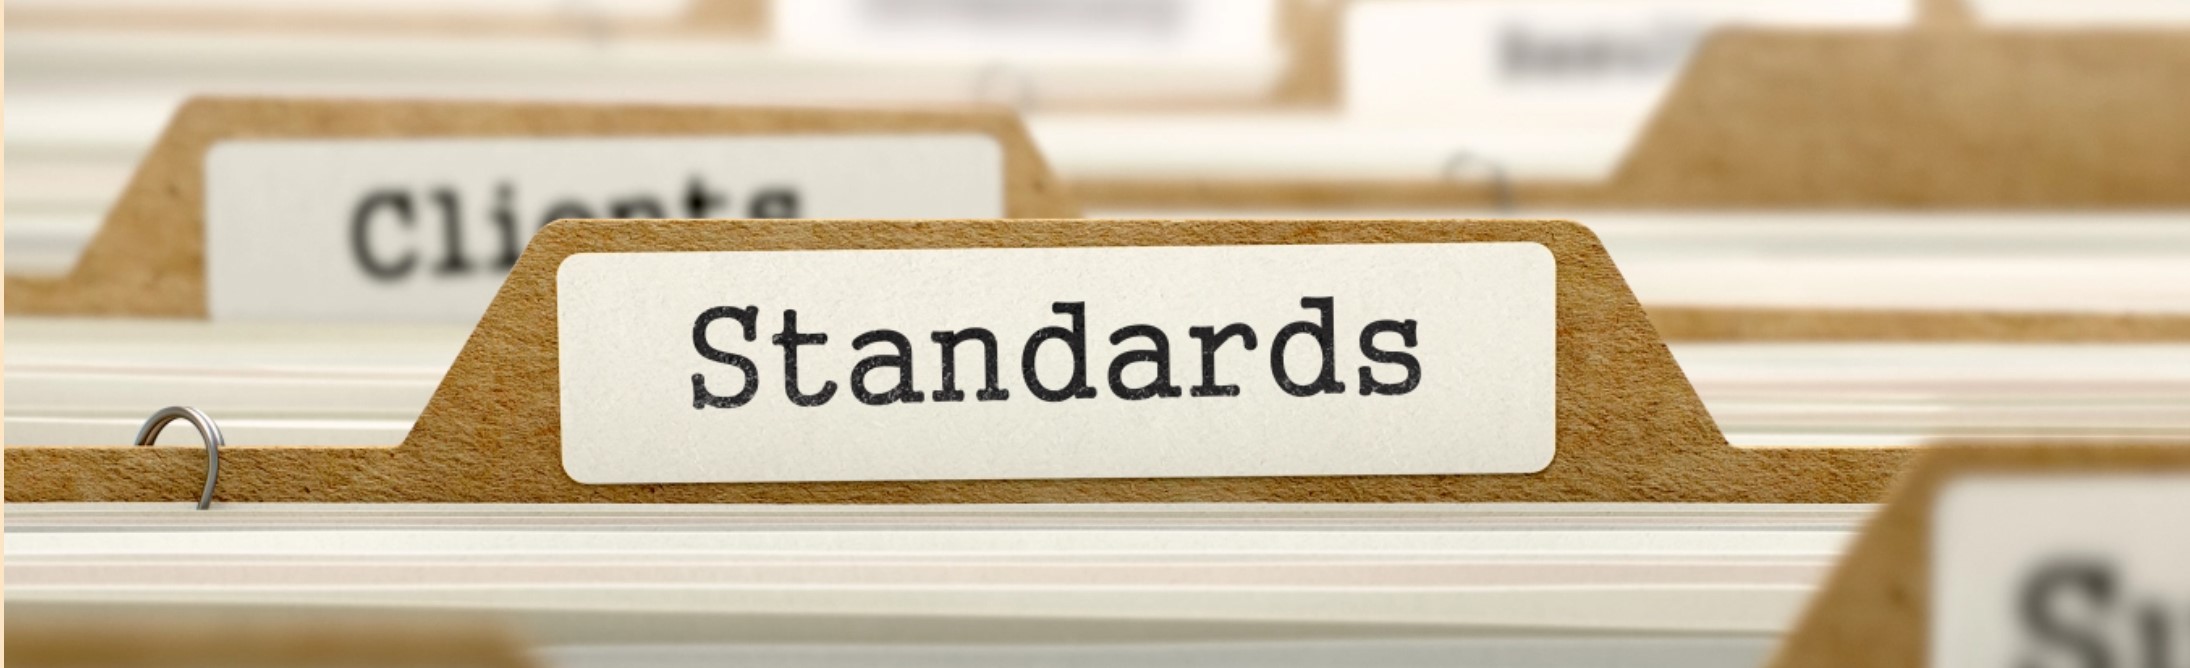 Codes and Standards Groups